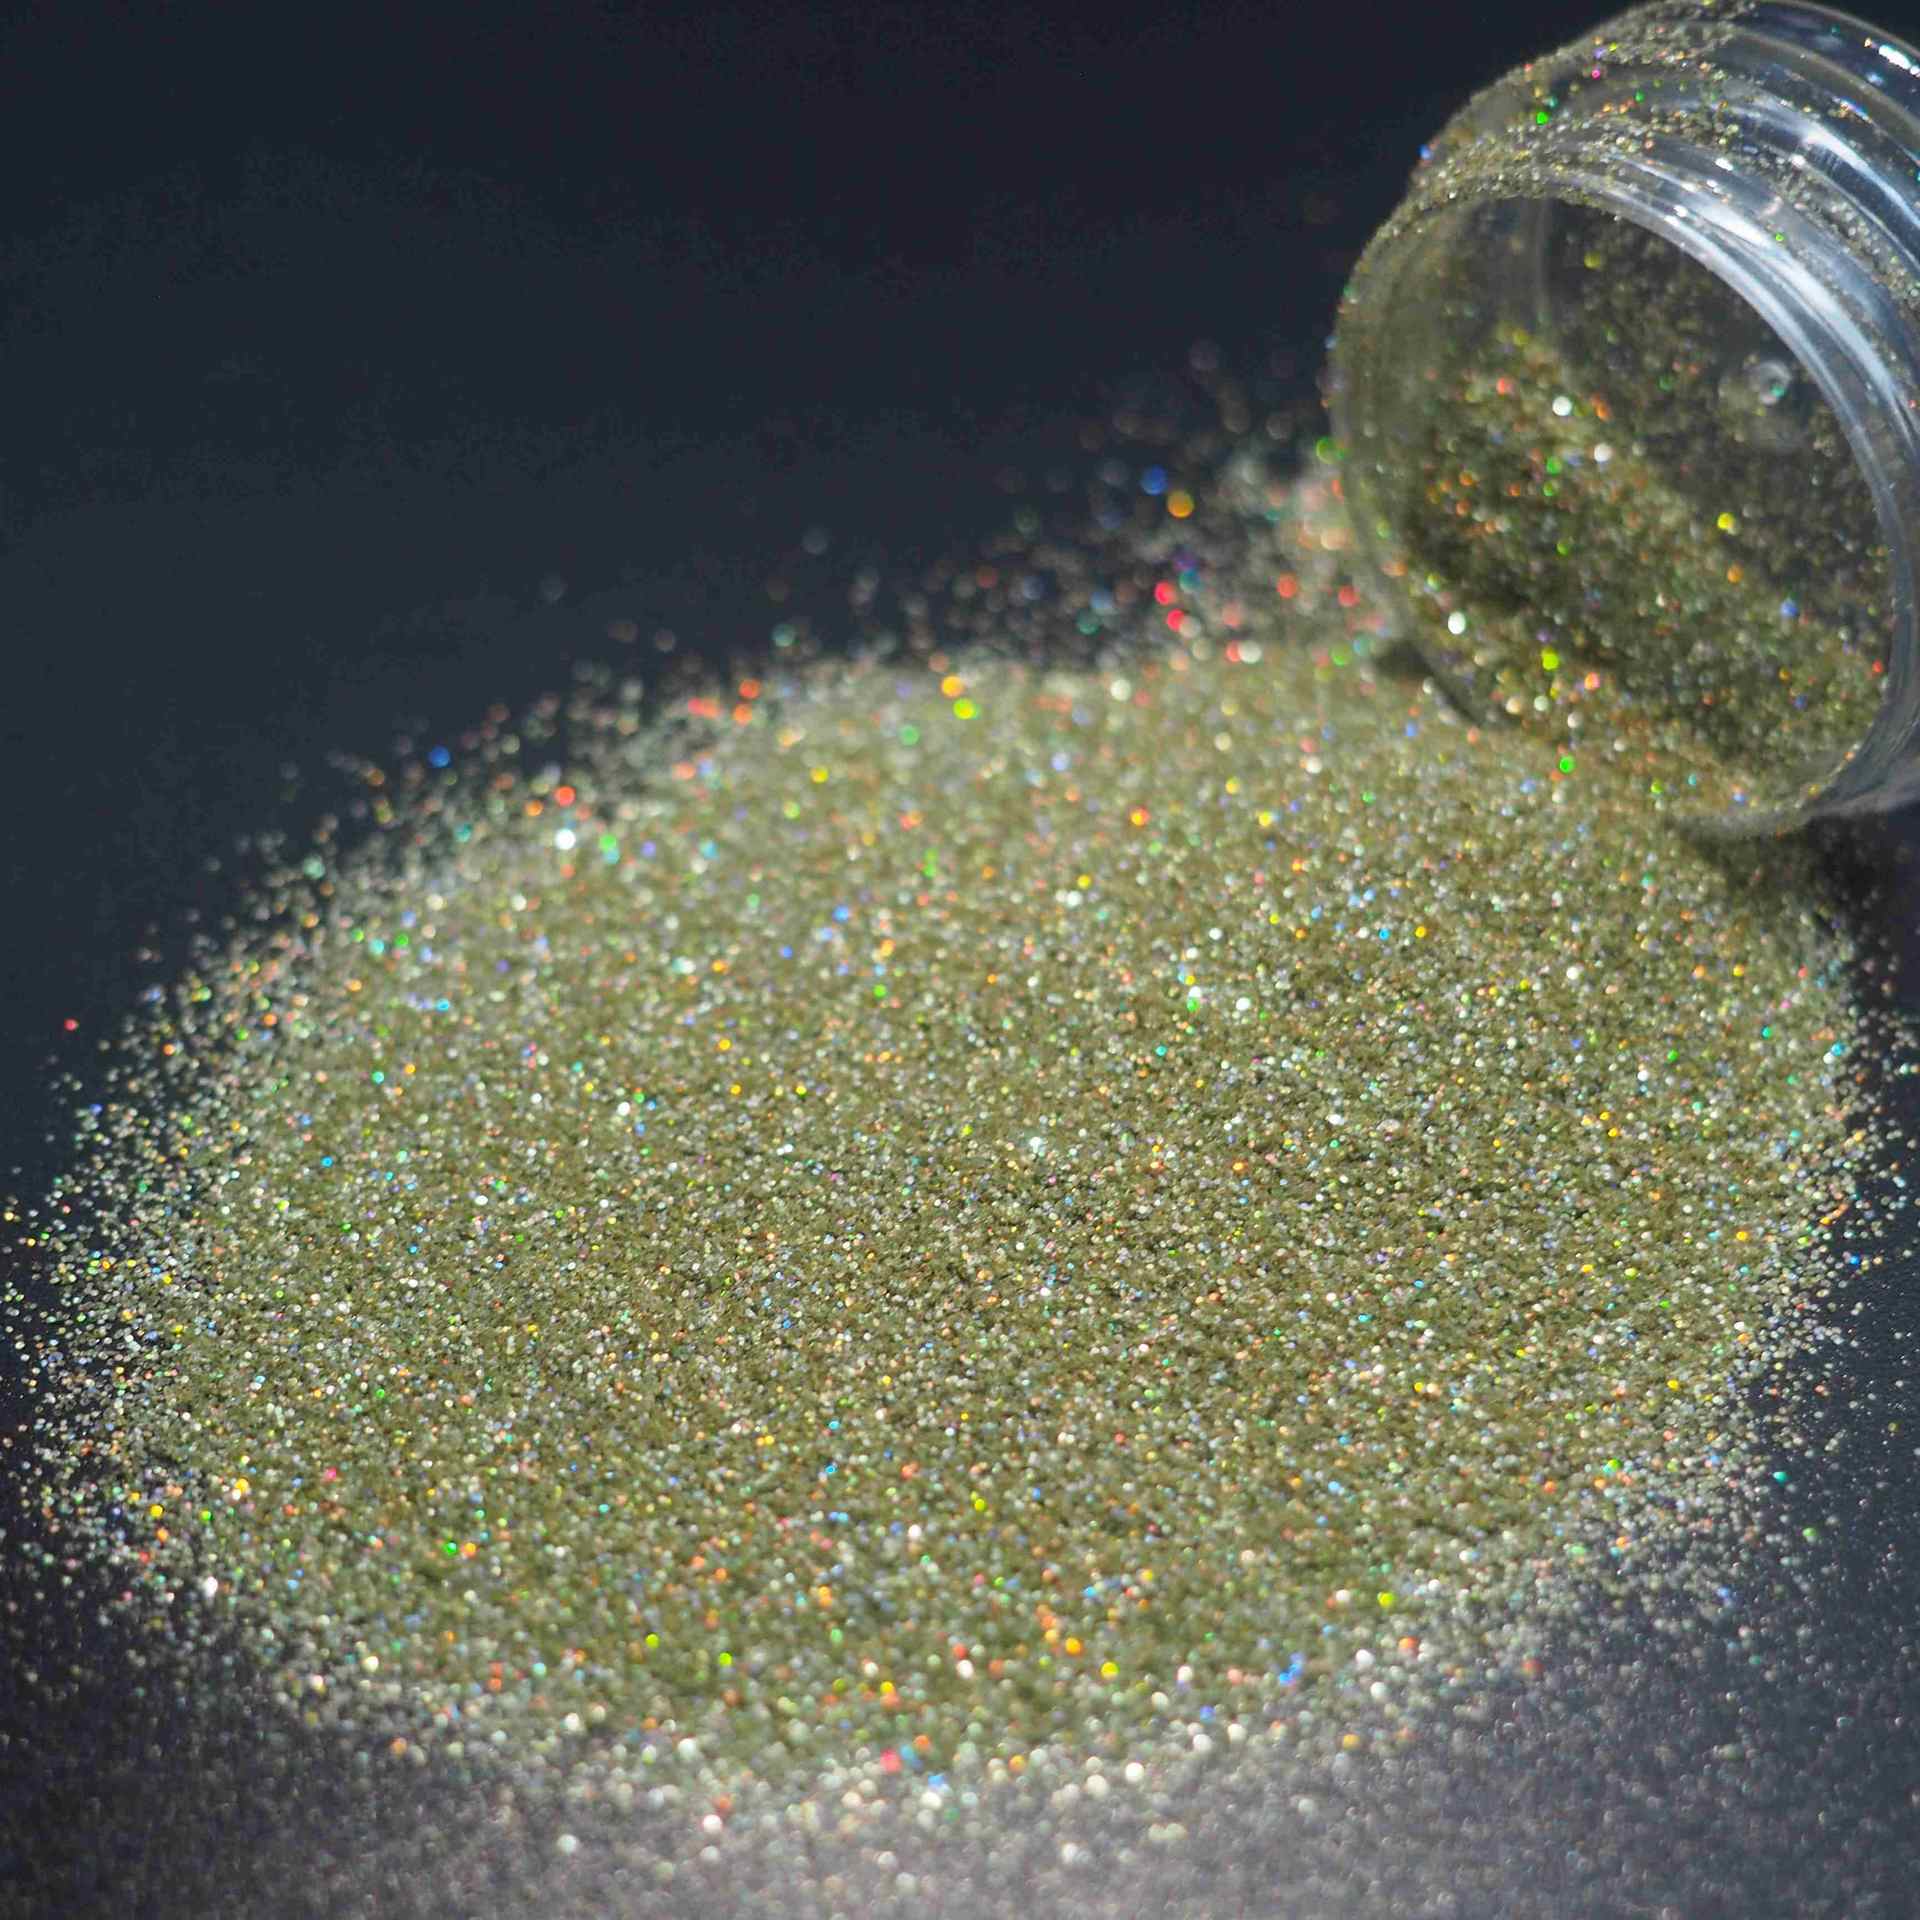 Factory Supply Colorful Wholesale Bulk Biodegradable Glitter Powder for Crafts chunky holographic Glitter